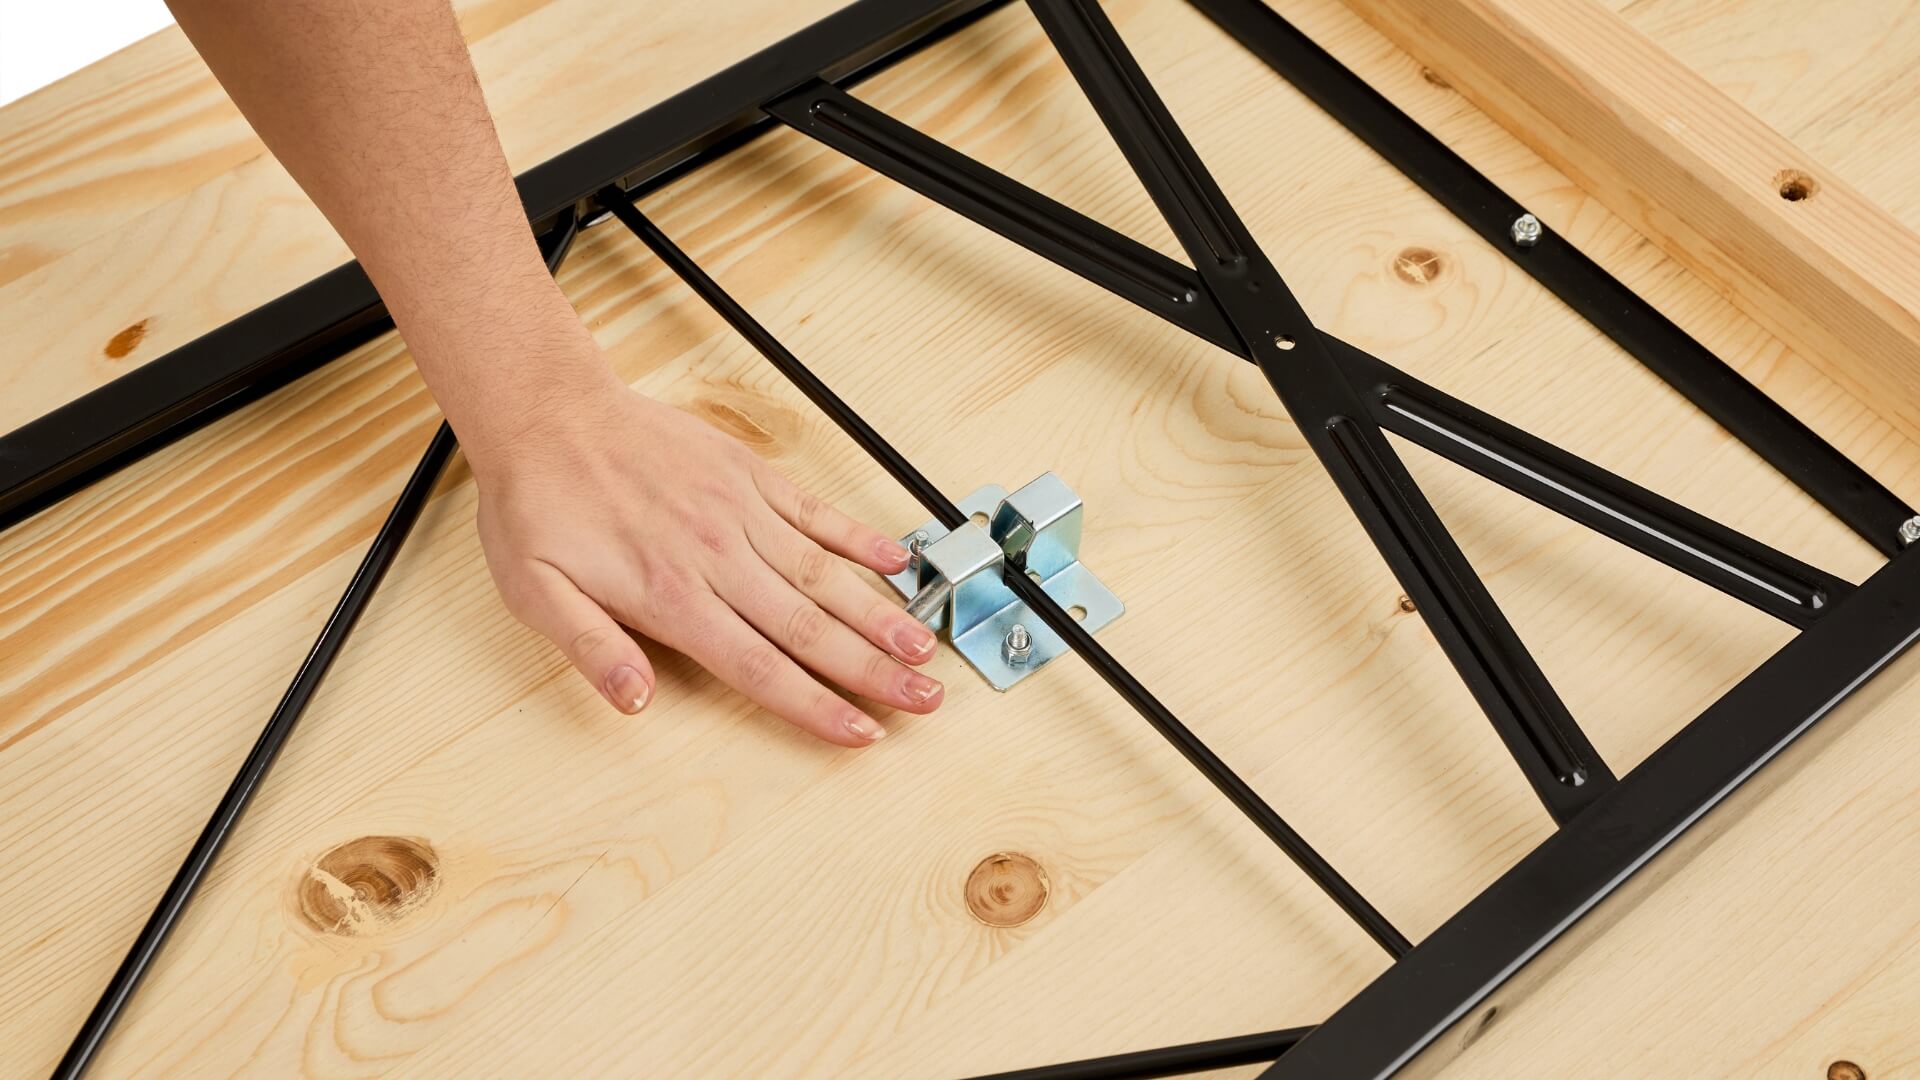 One hand pushes down the lever of the folding furniture lock to assemble the wide beer garden table set.